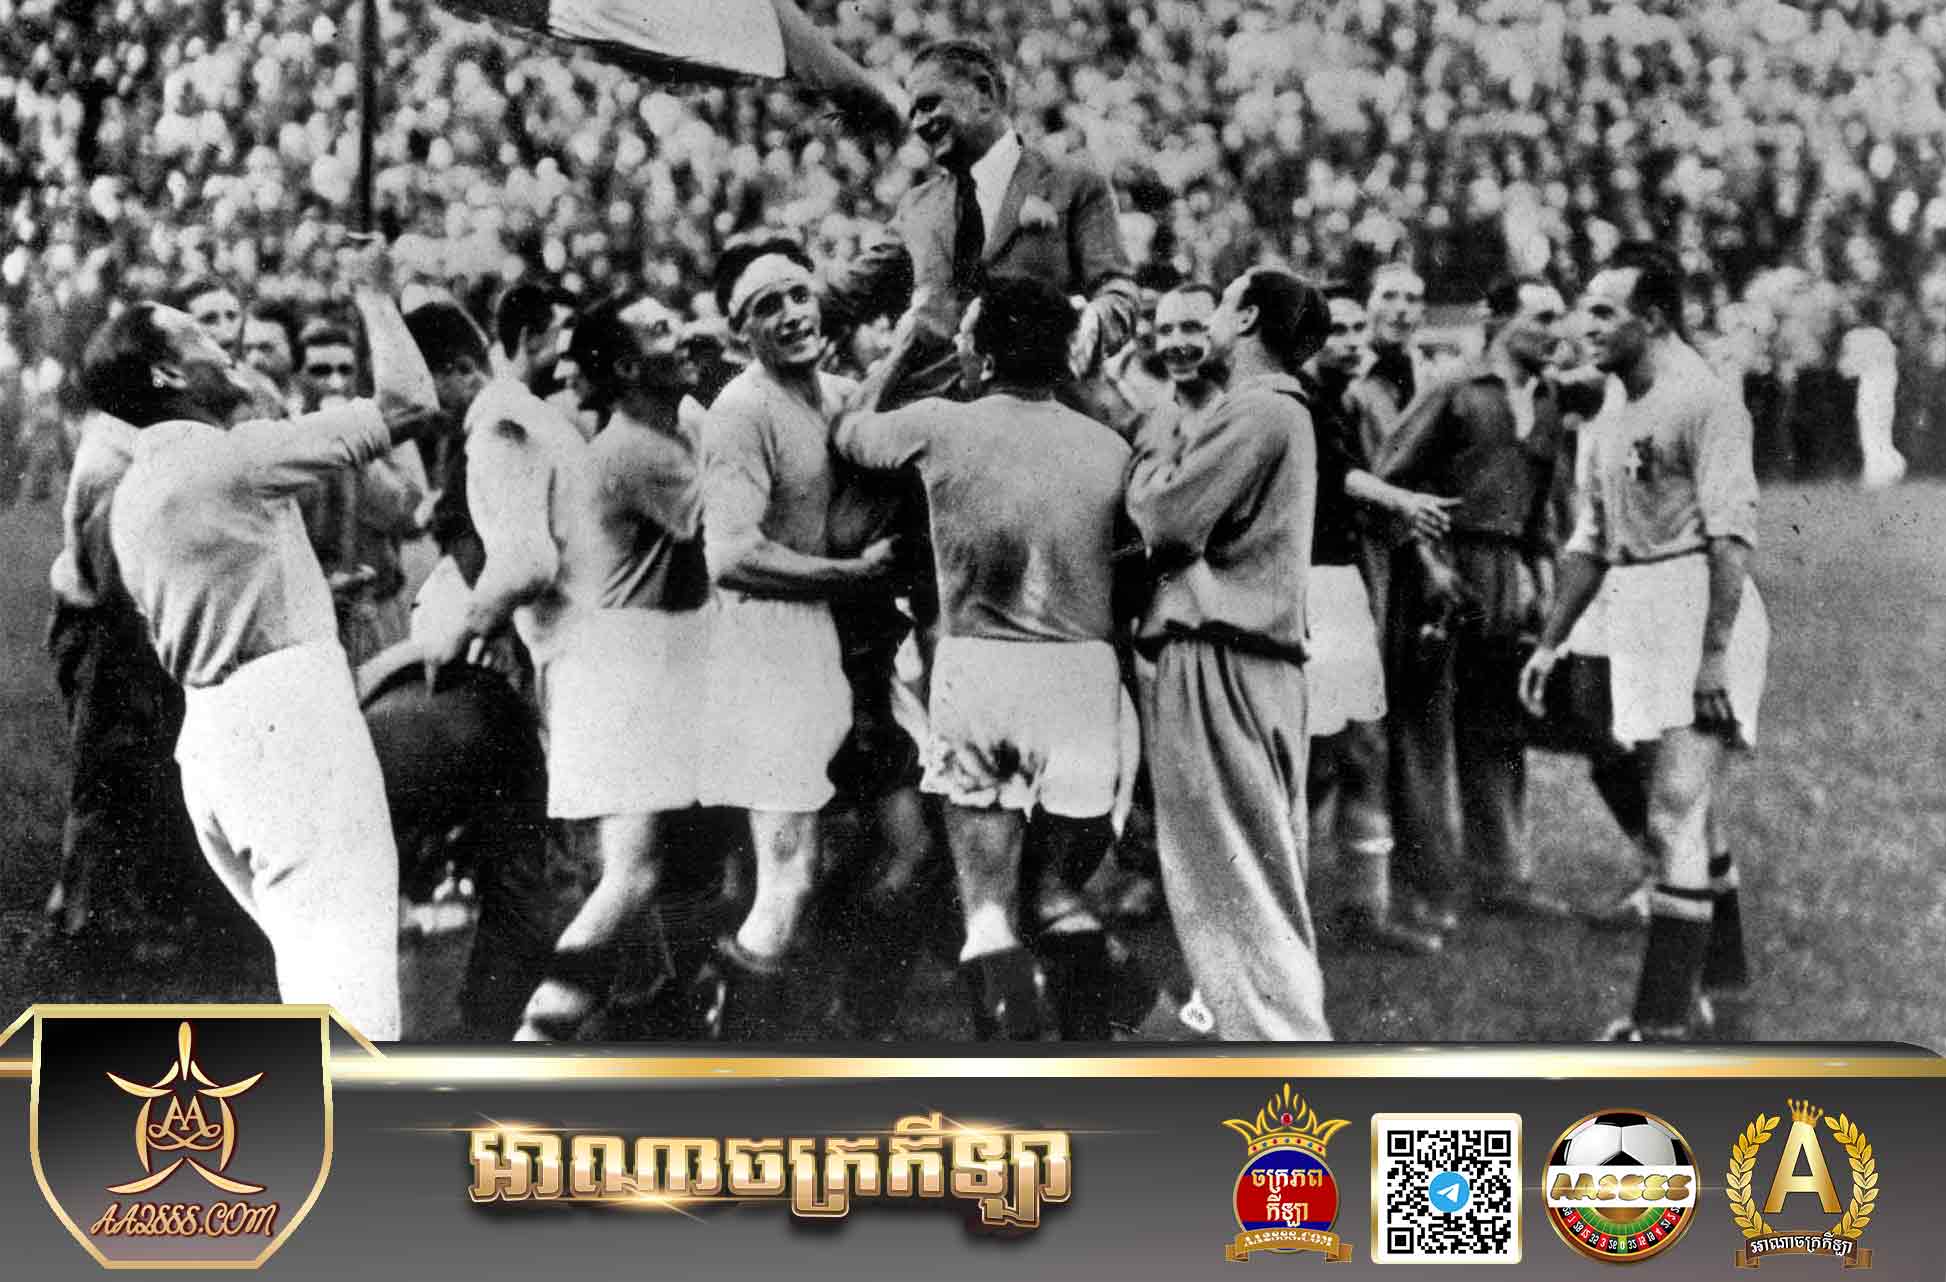 Italy is the second country to win the World Cup at home in 1934 